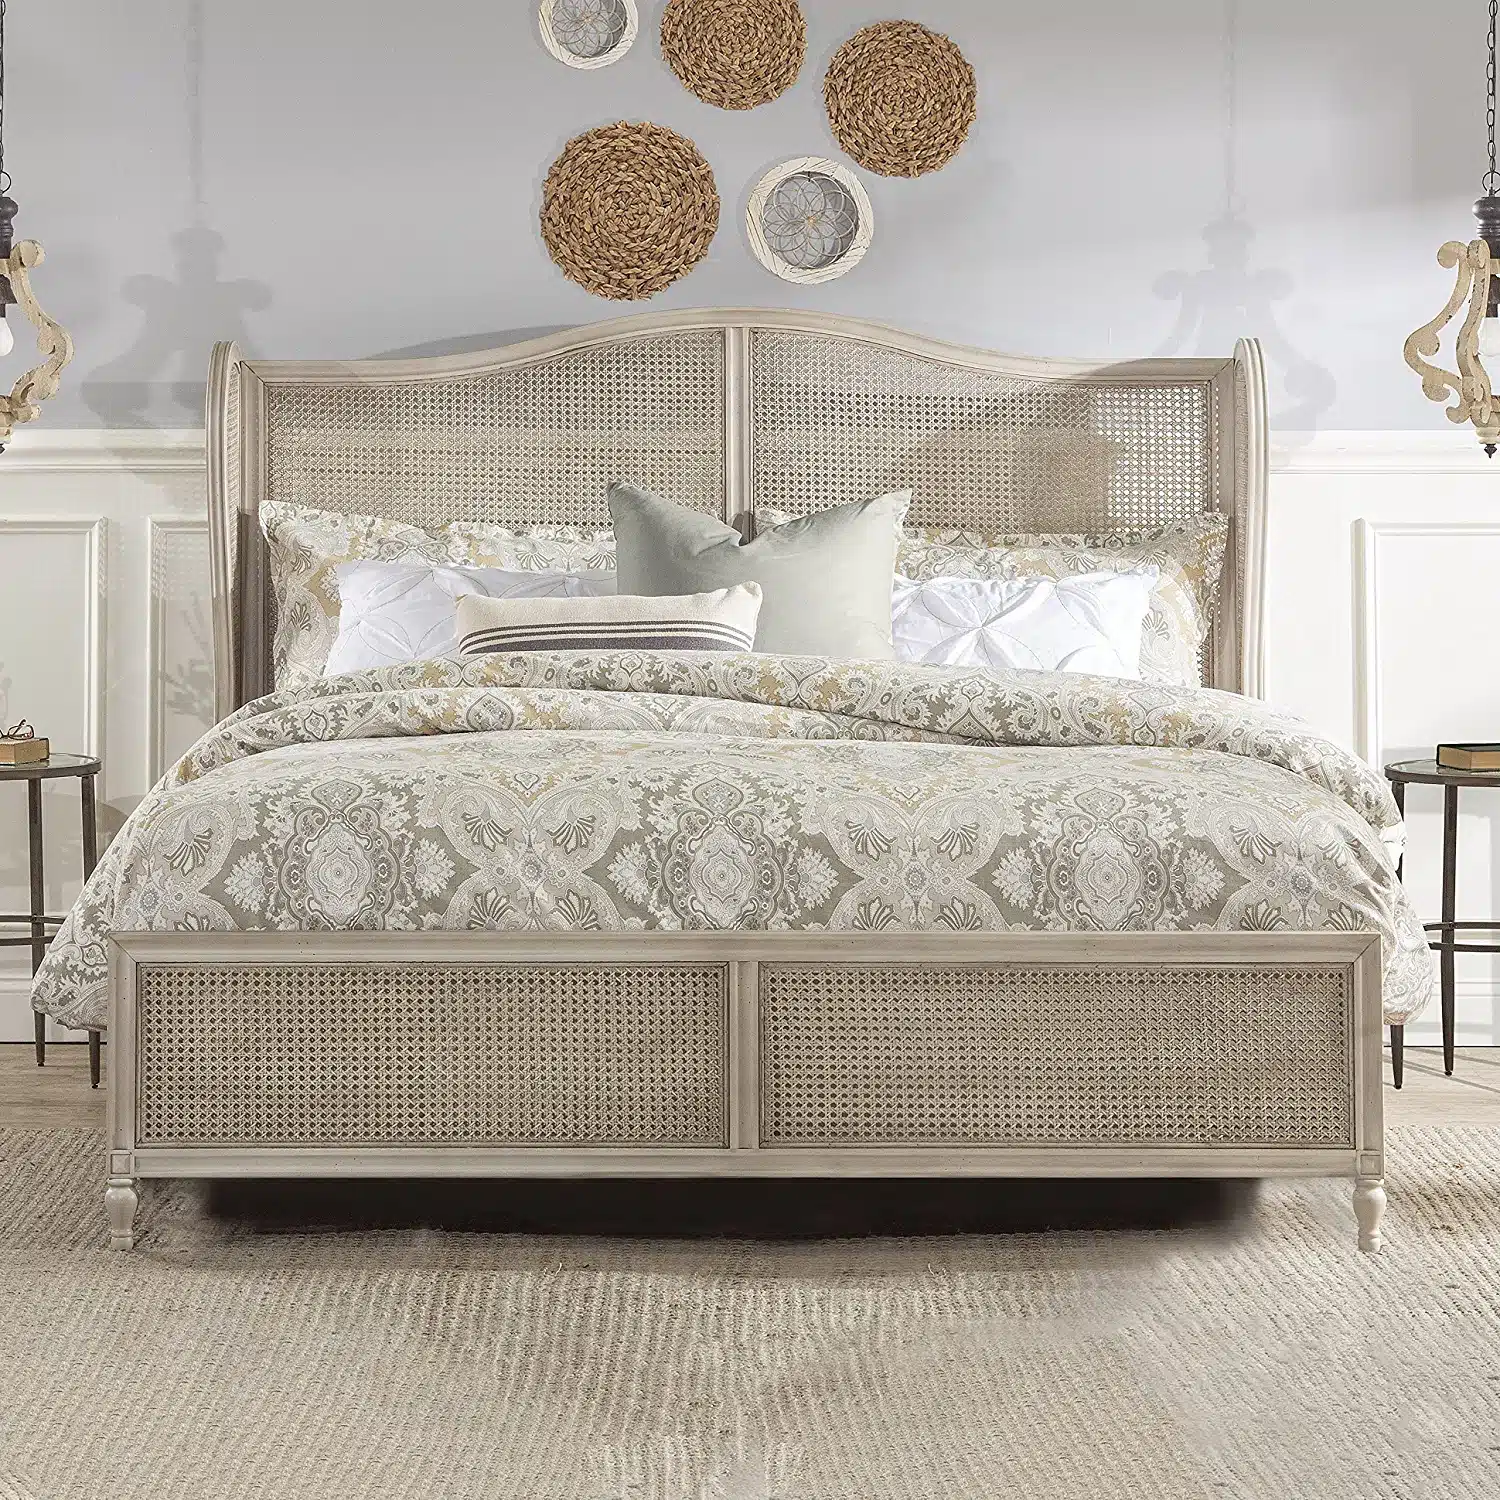 Muted Cane Bed neutral bedroom ideas